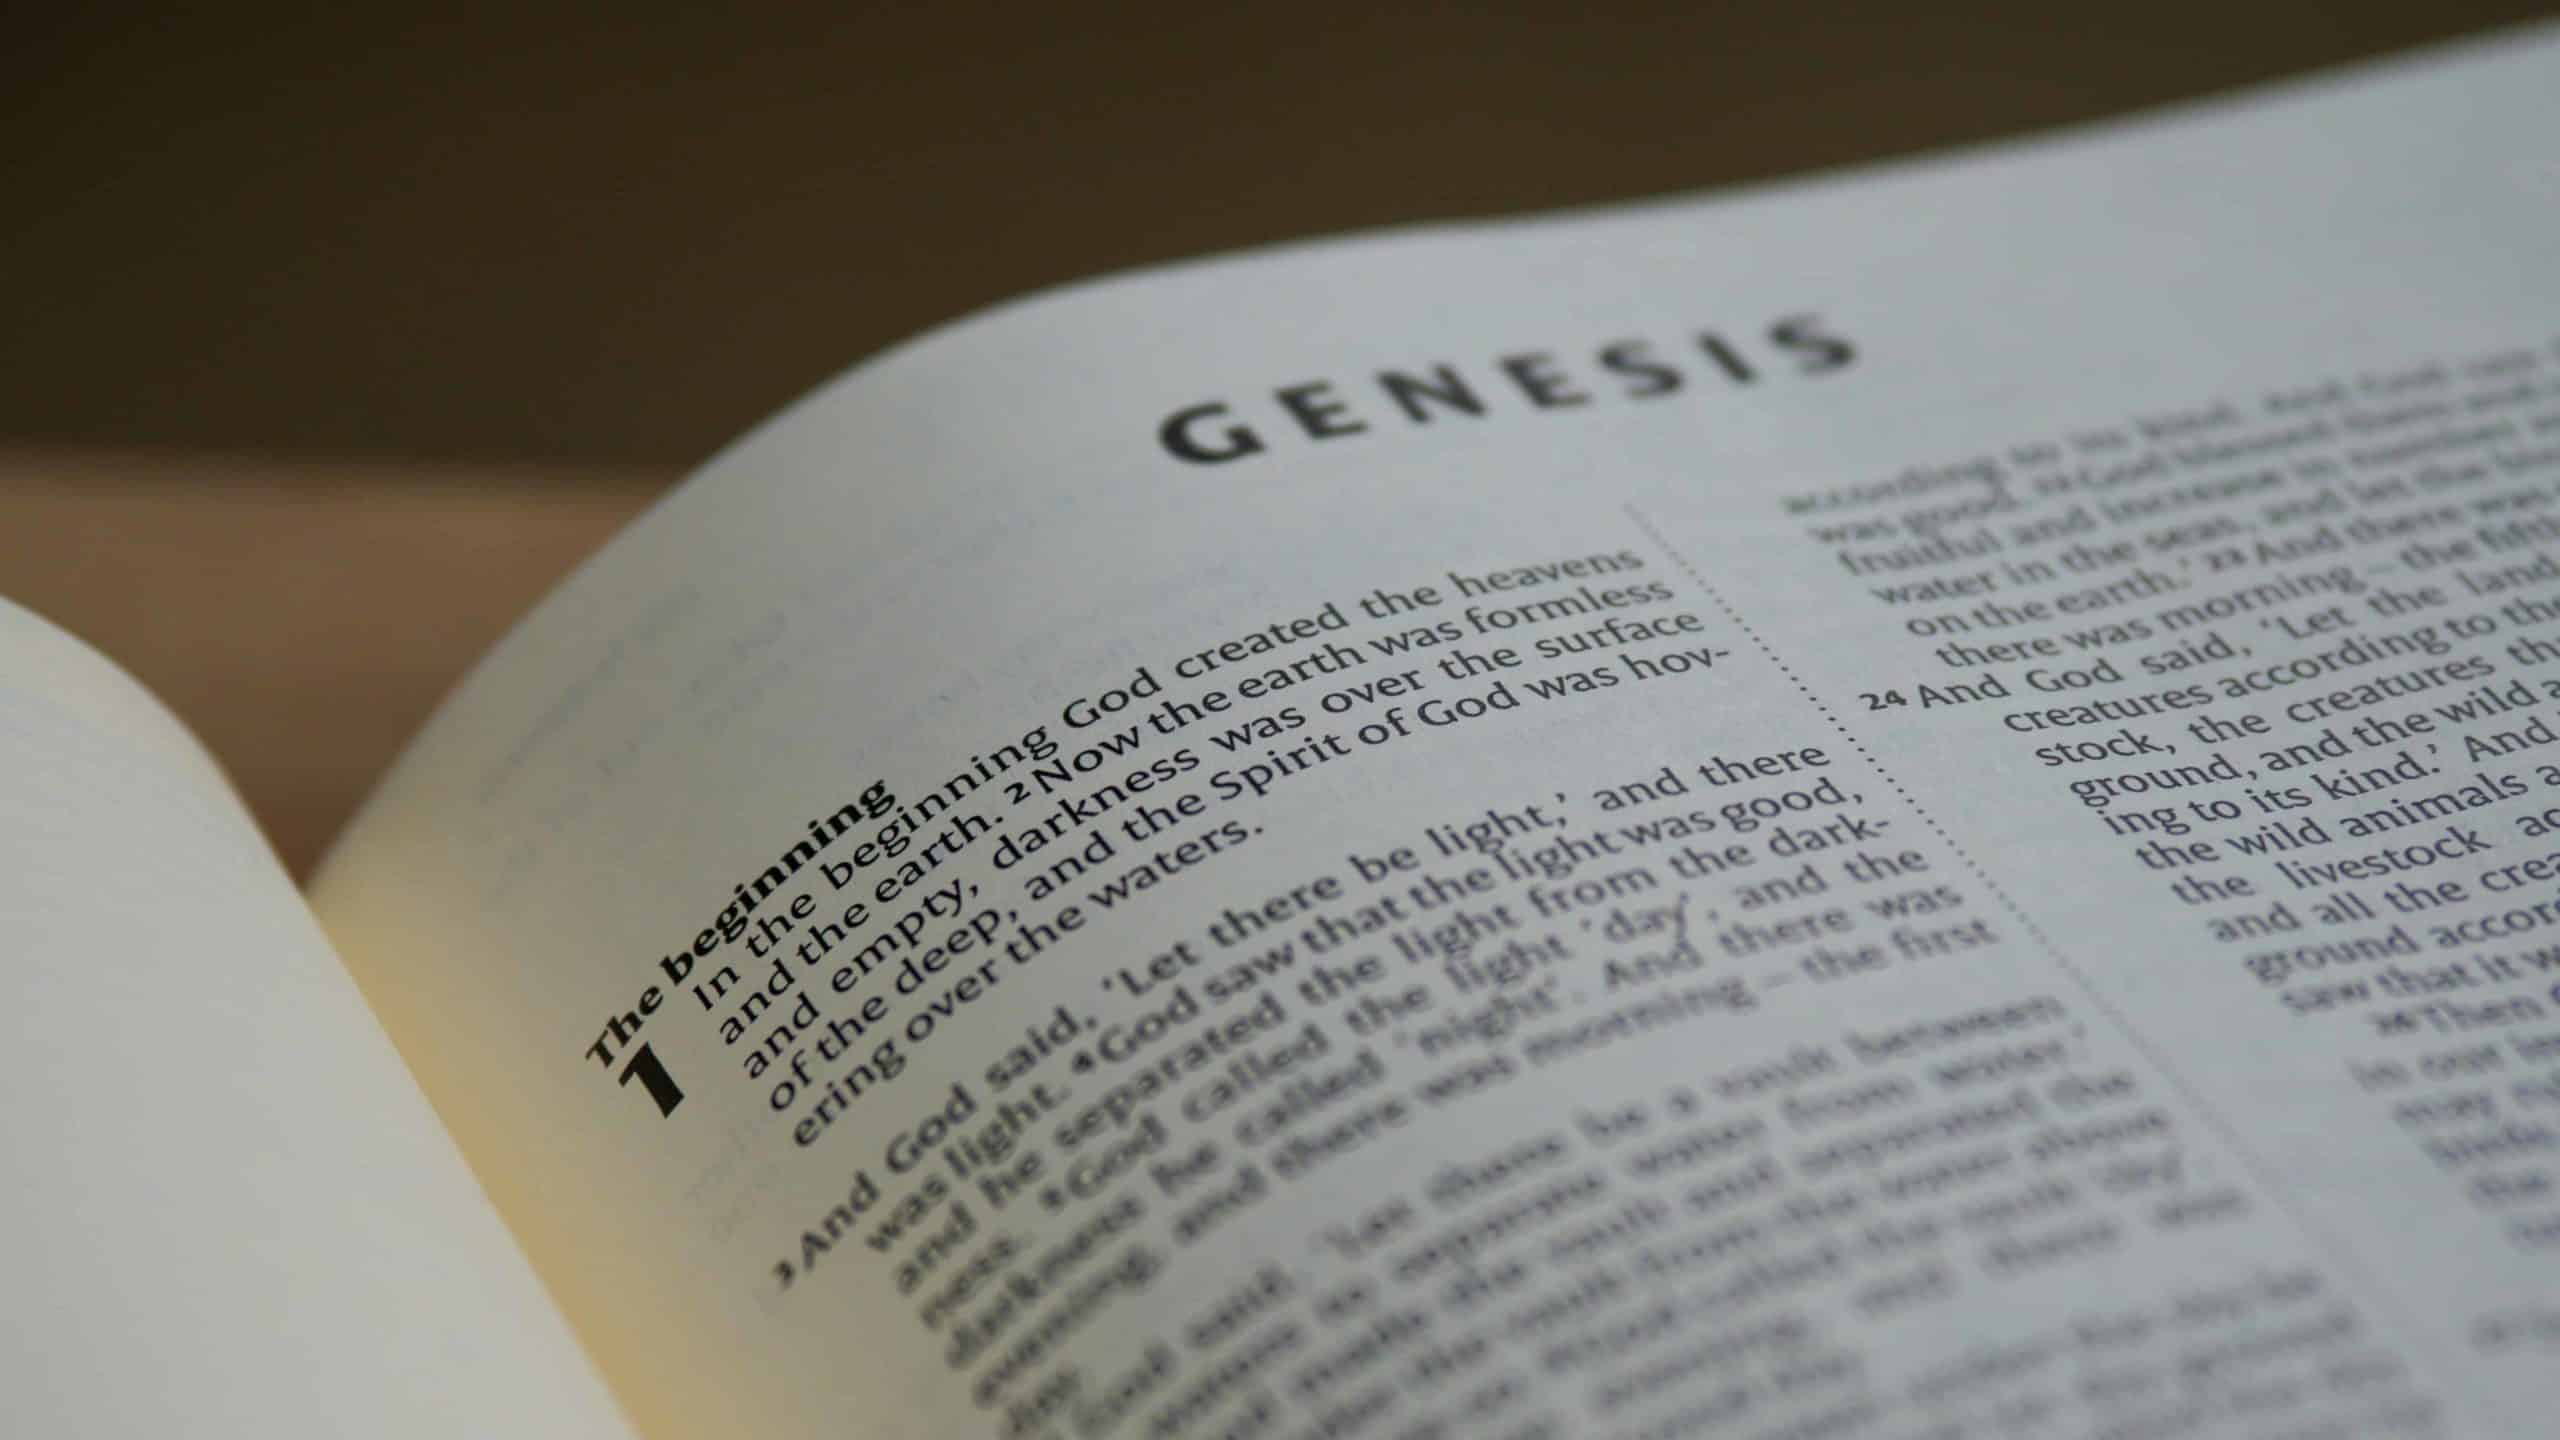 The Bible opened to the first chapter of Genesis.